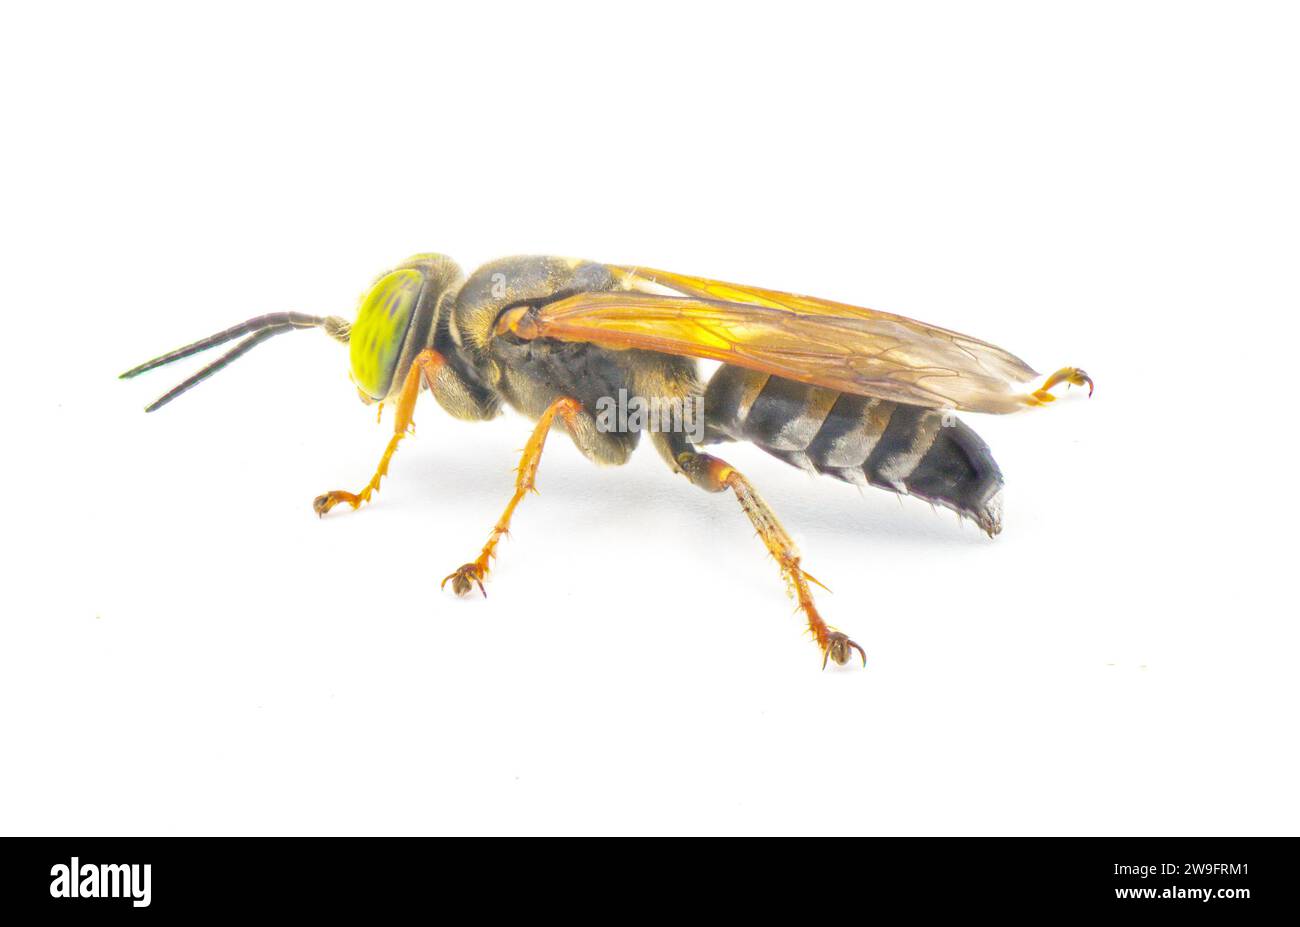 Tachytes aurulentus - green eye sand loving wasp. Tachytes is a genus of predatory, solitary wasps and a species of square headed wasp in the family C Stock Photo